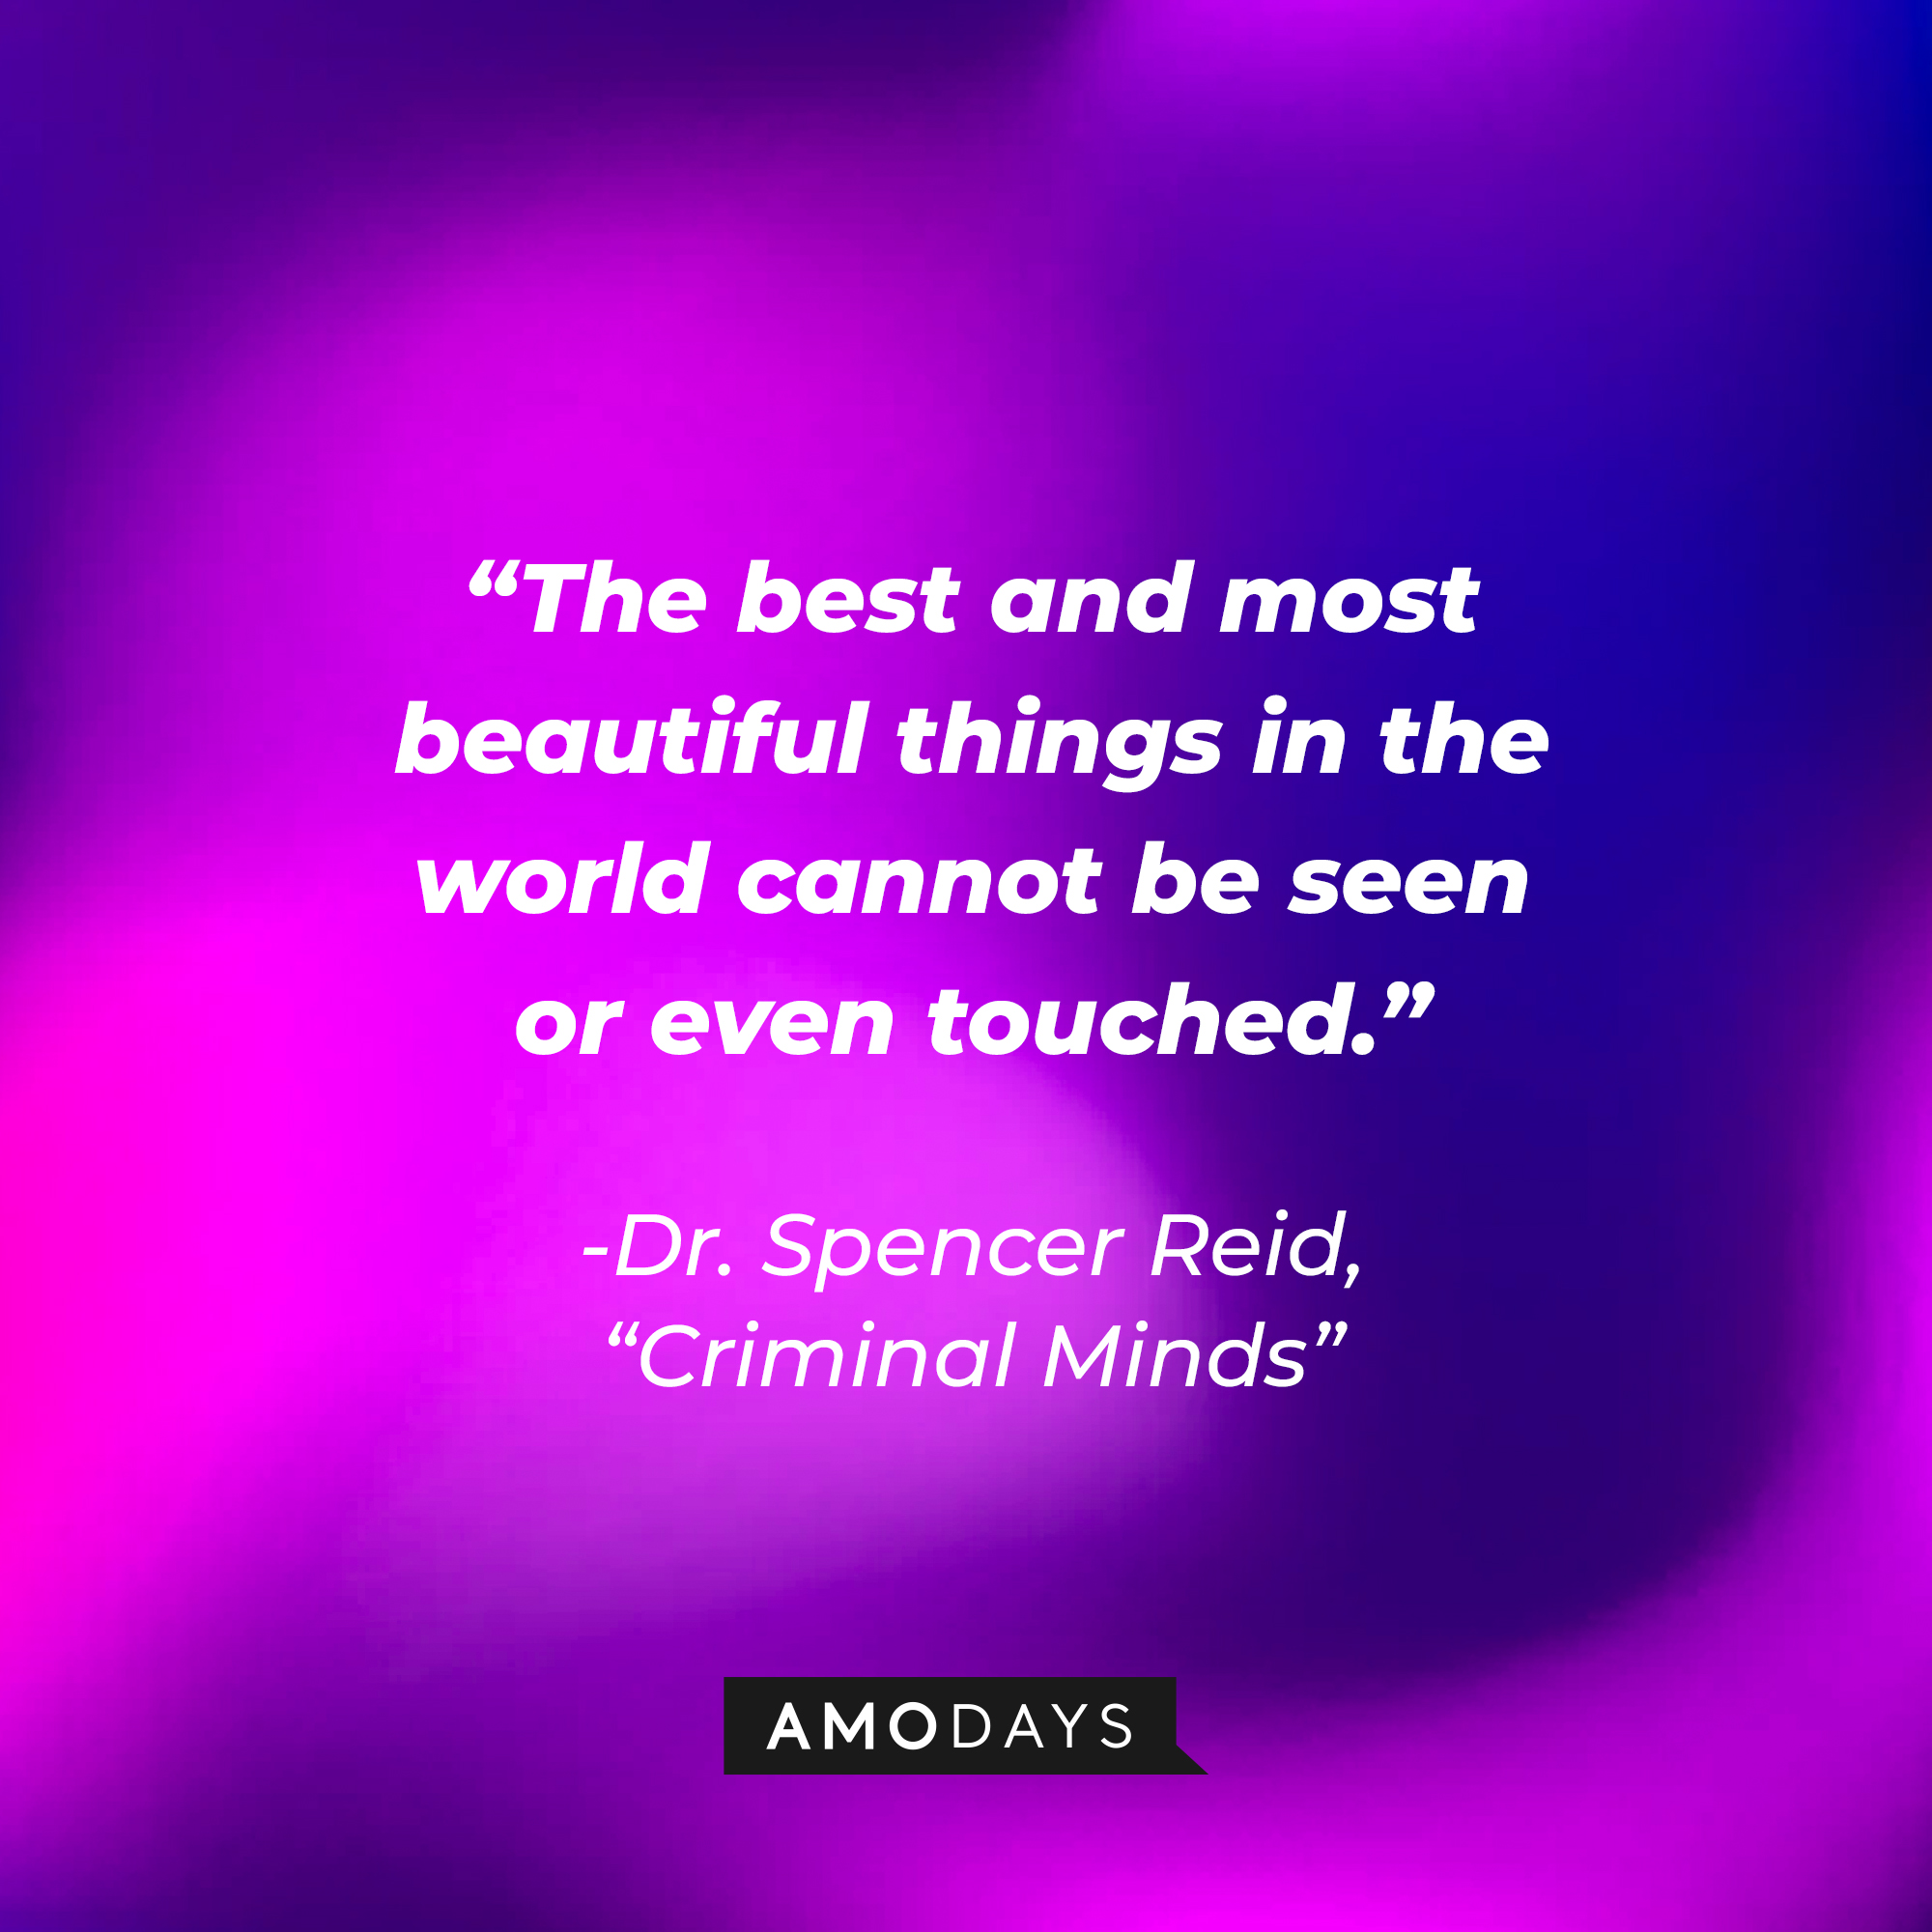 Dr. Spencer Reid's quote: “The best and most beautiful things in the world cannot be seen or even touched.” | Source: Amodays